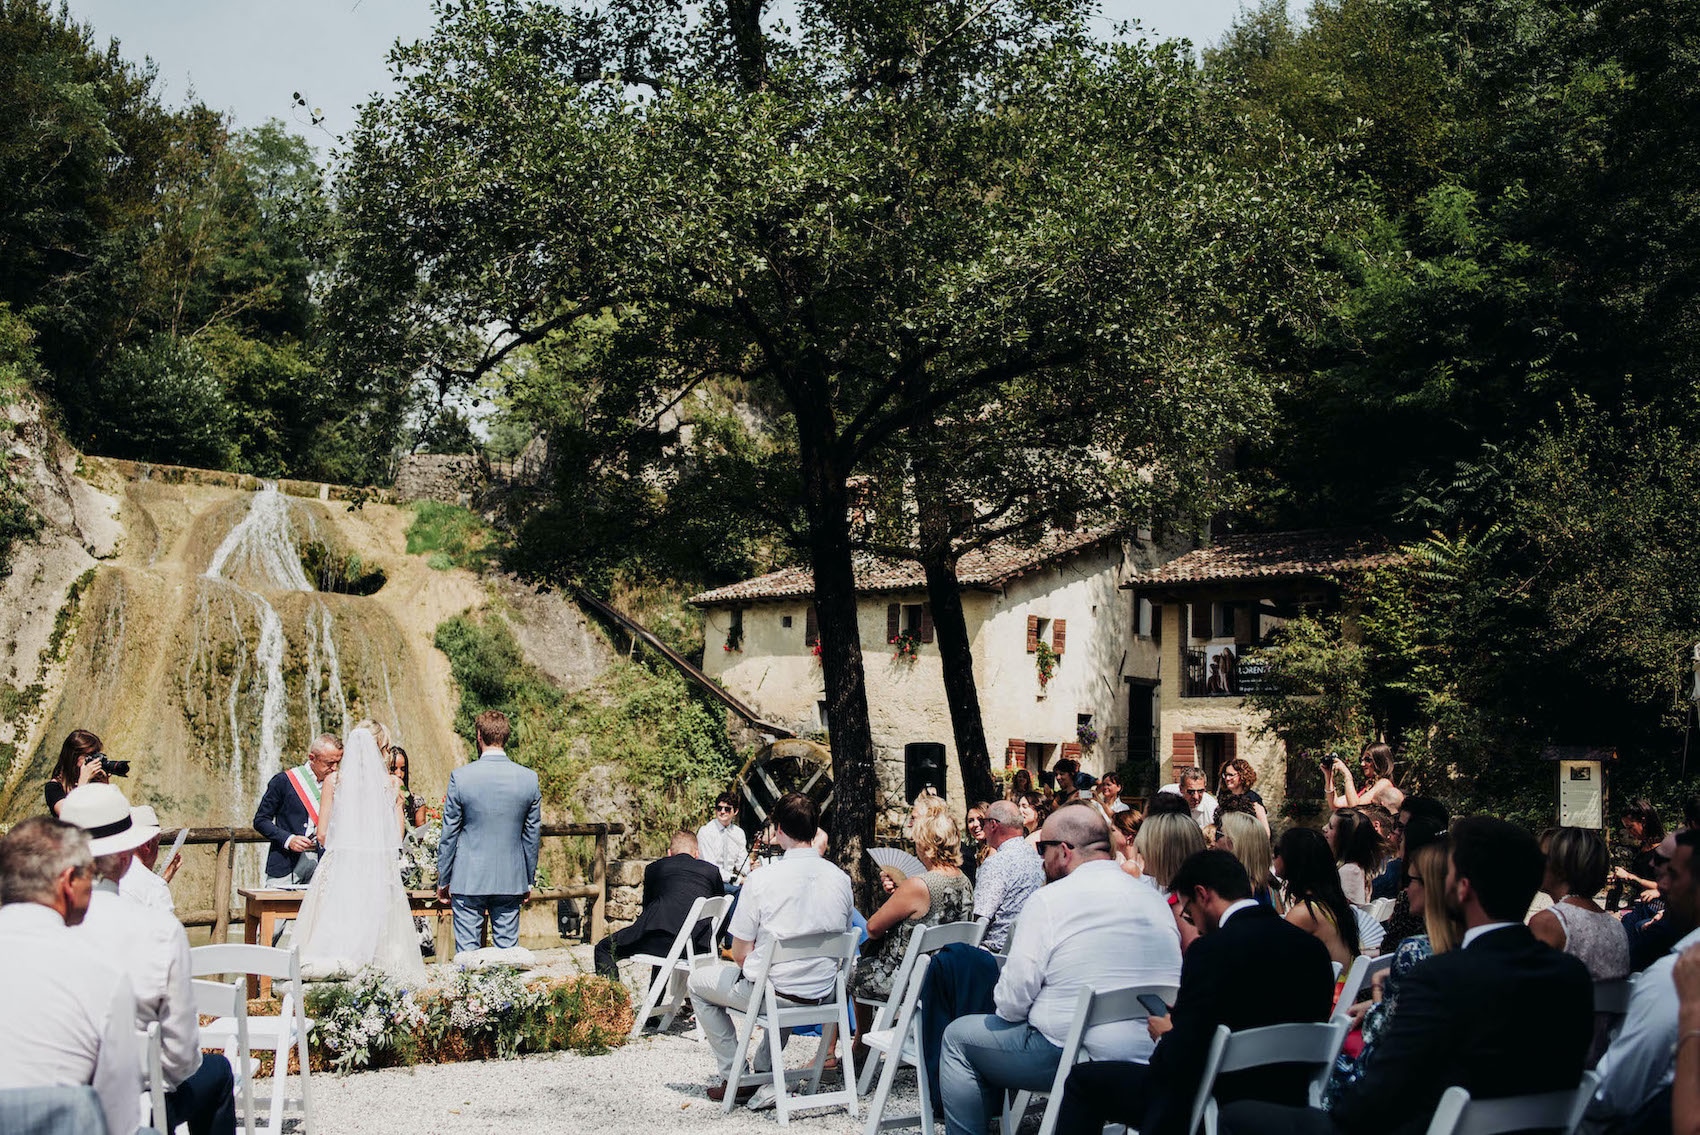 Hayley and Enrico saying their vows in front of a water mill 